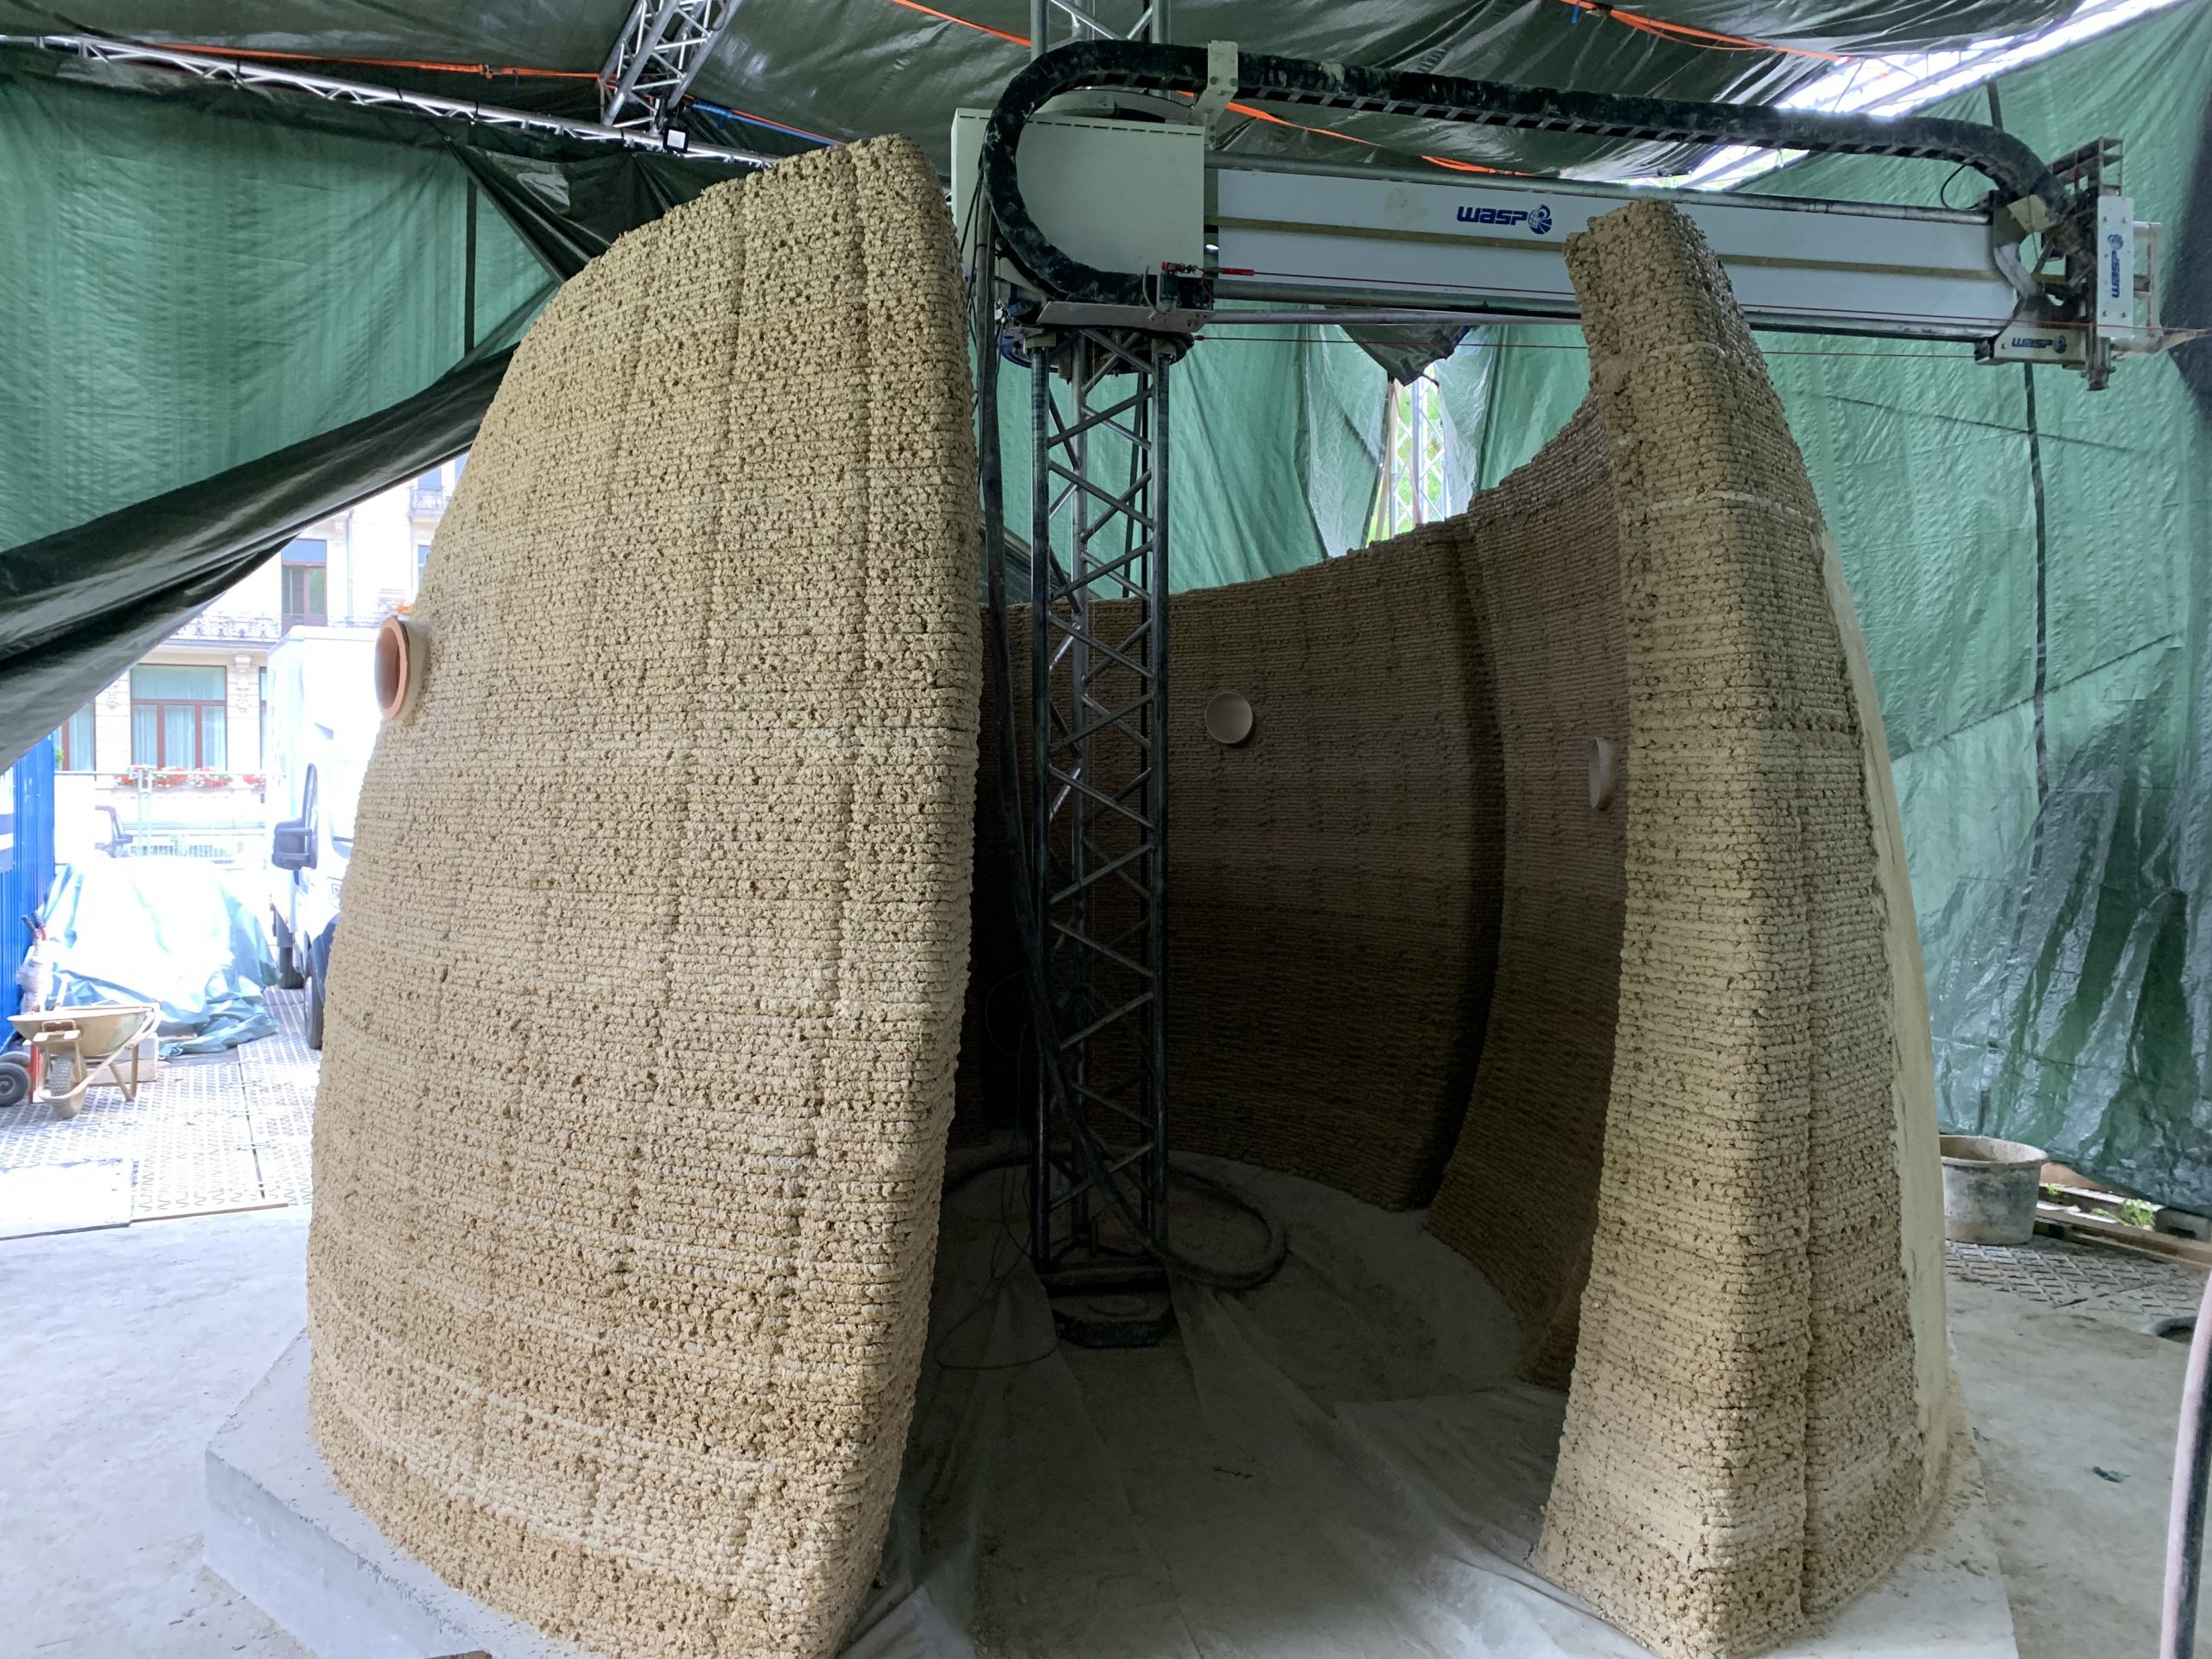 3D printing the "House of Dust" from sustainable materials. Photo via WASP.